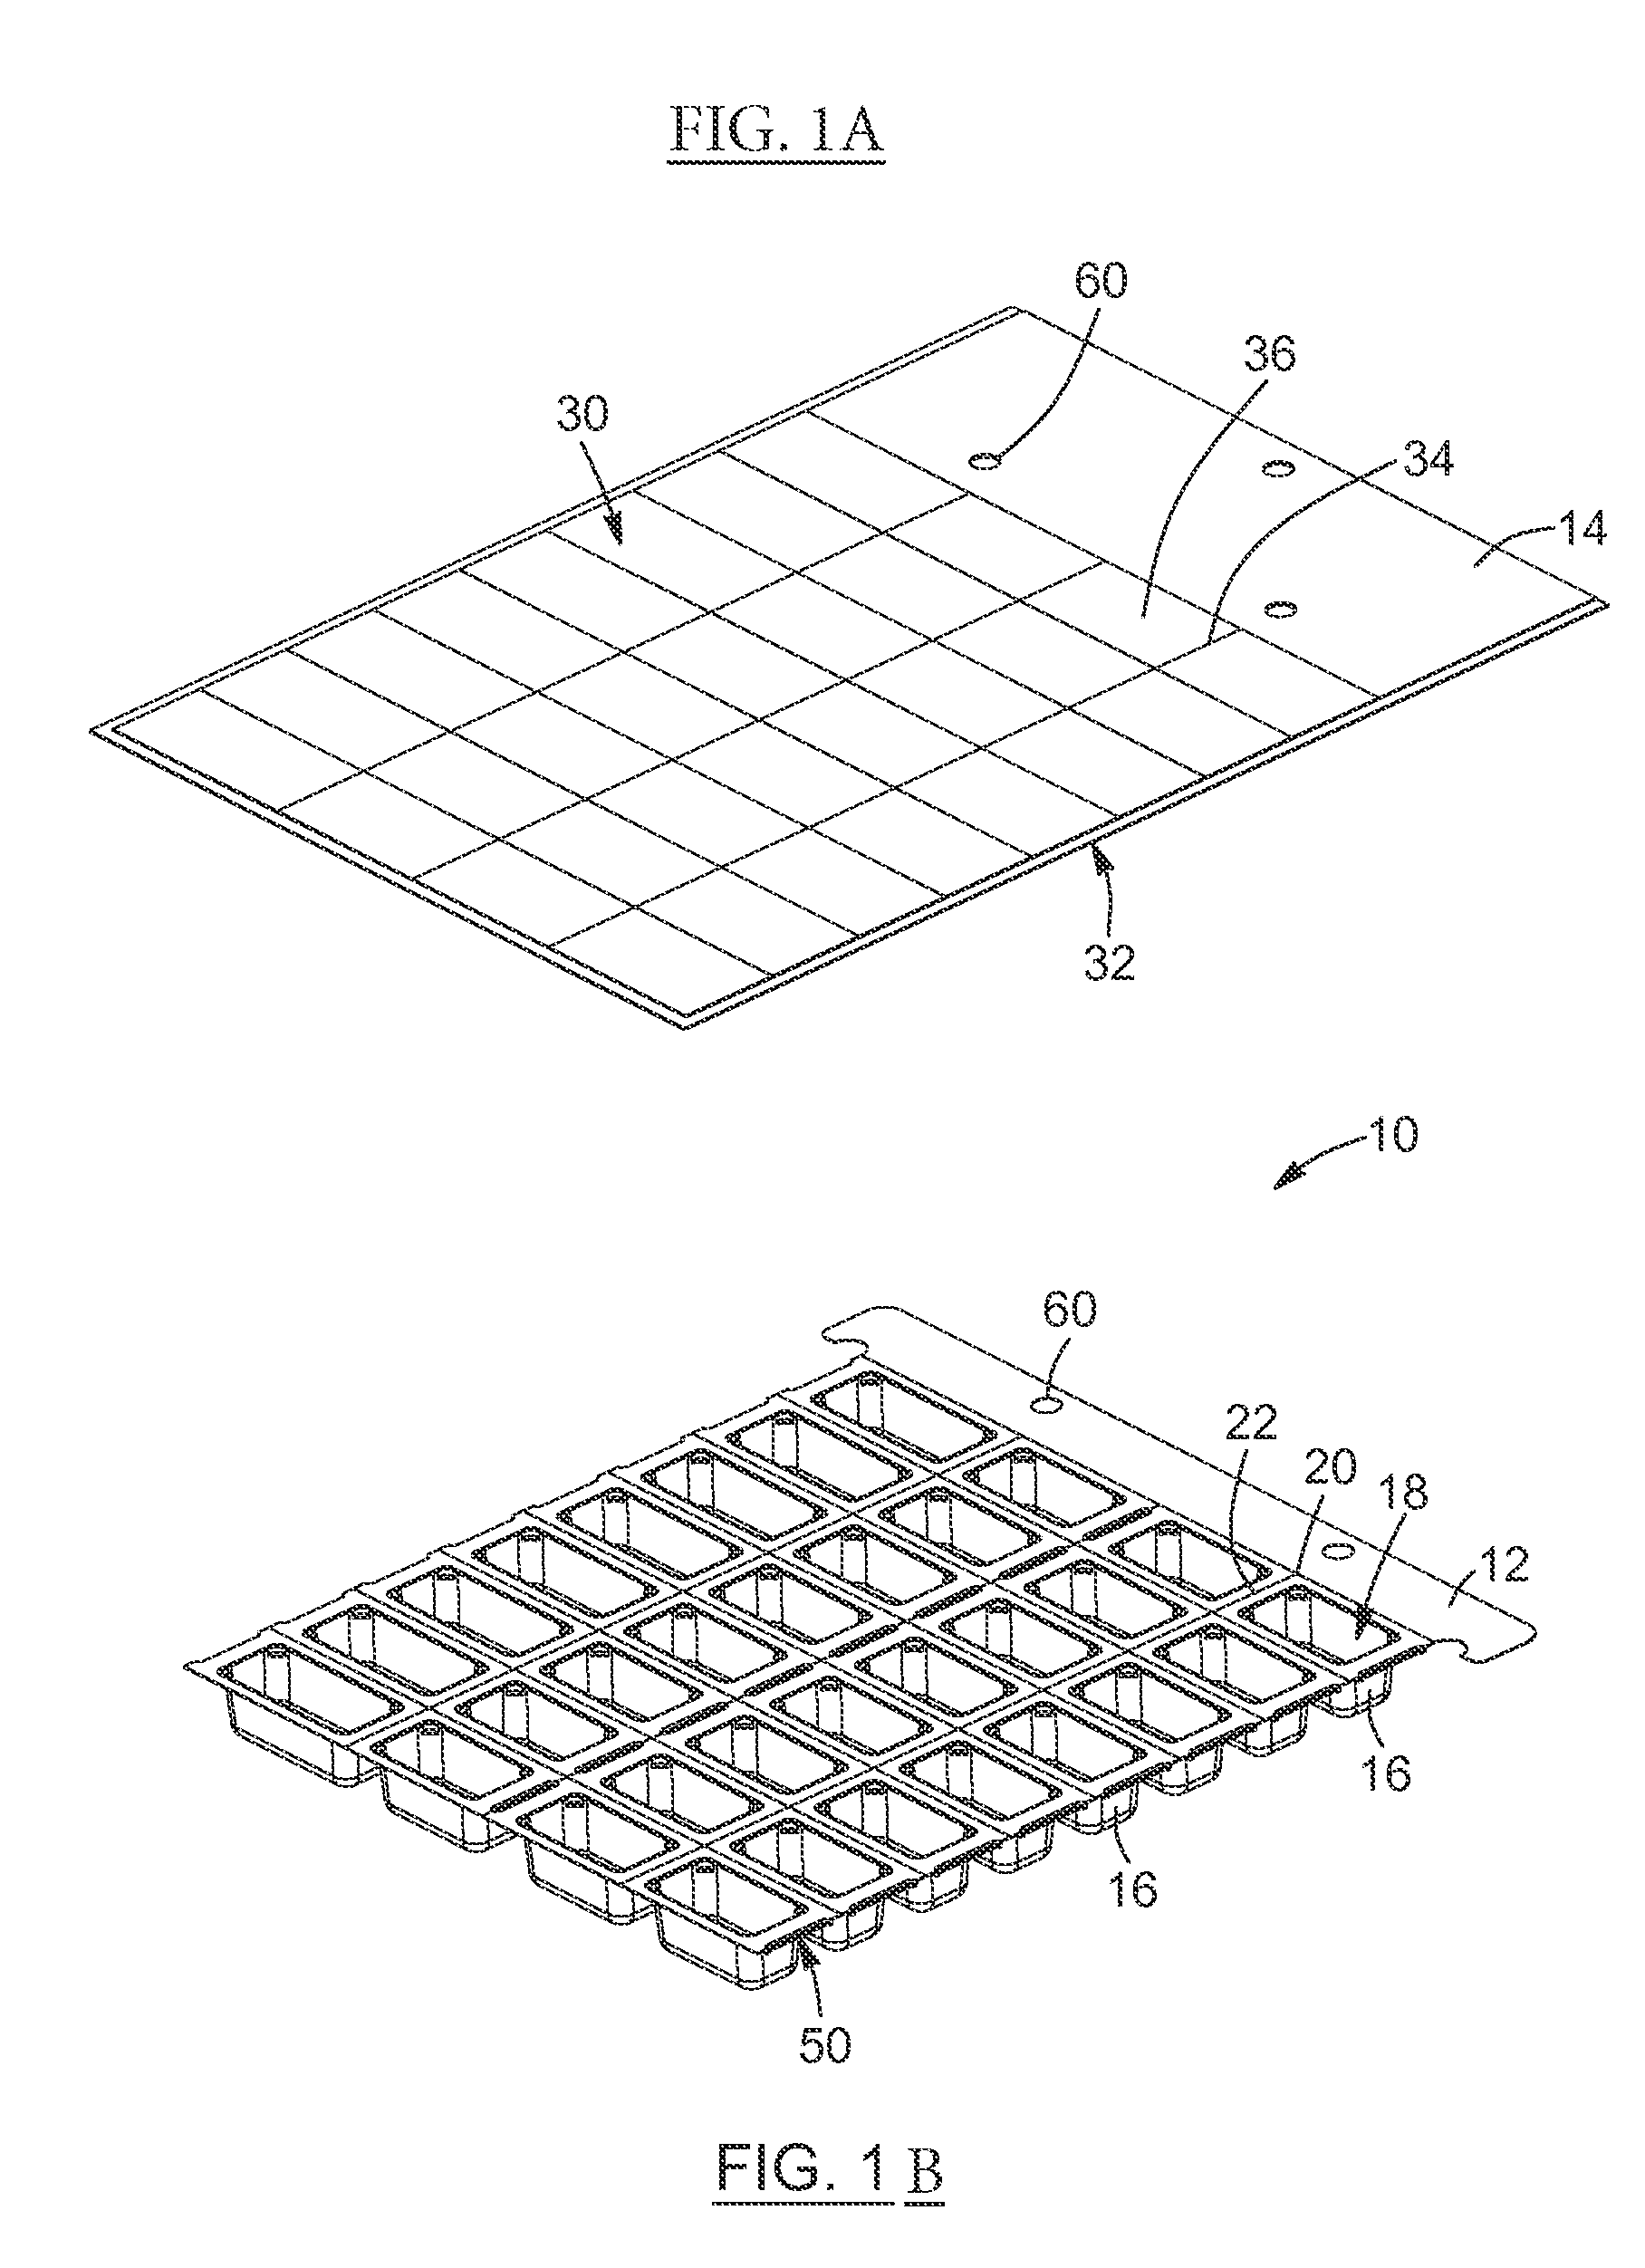 Sealing sheet for closing a container-defining sheet reconfigurable between different dosage schedules